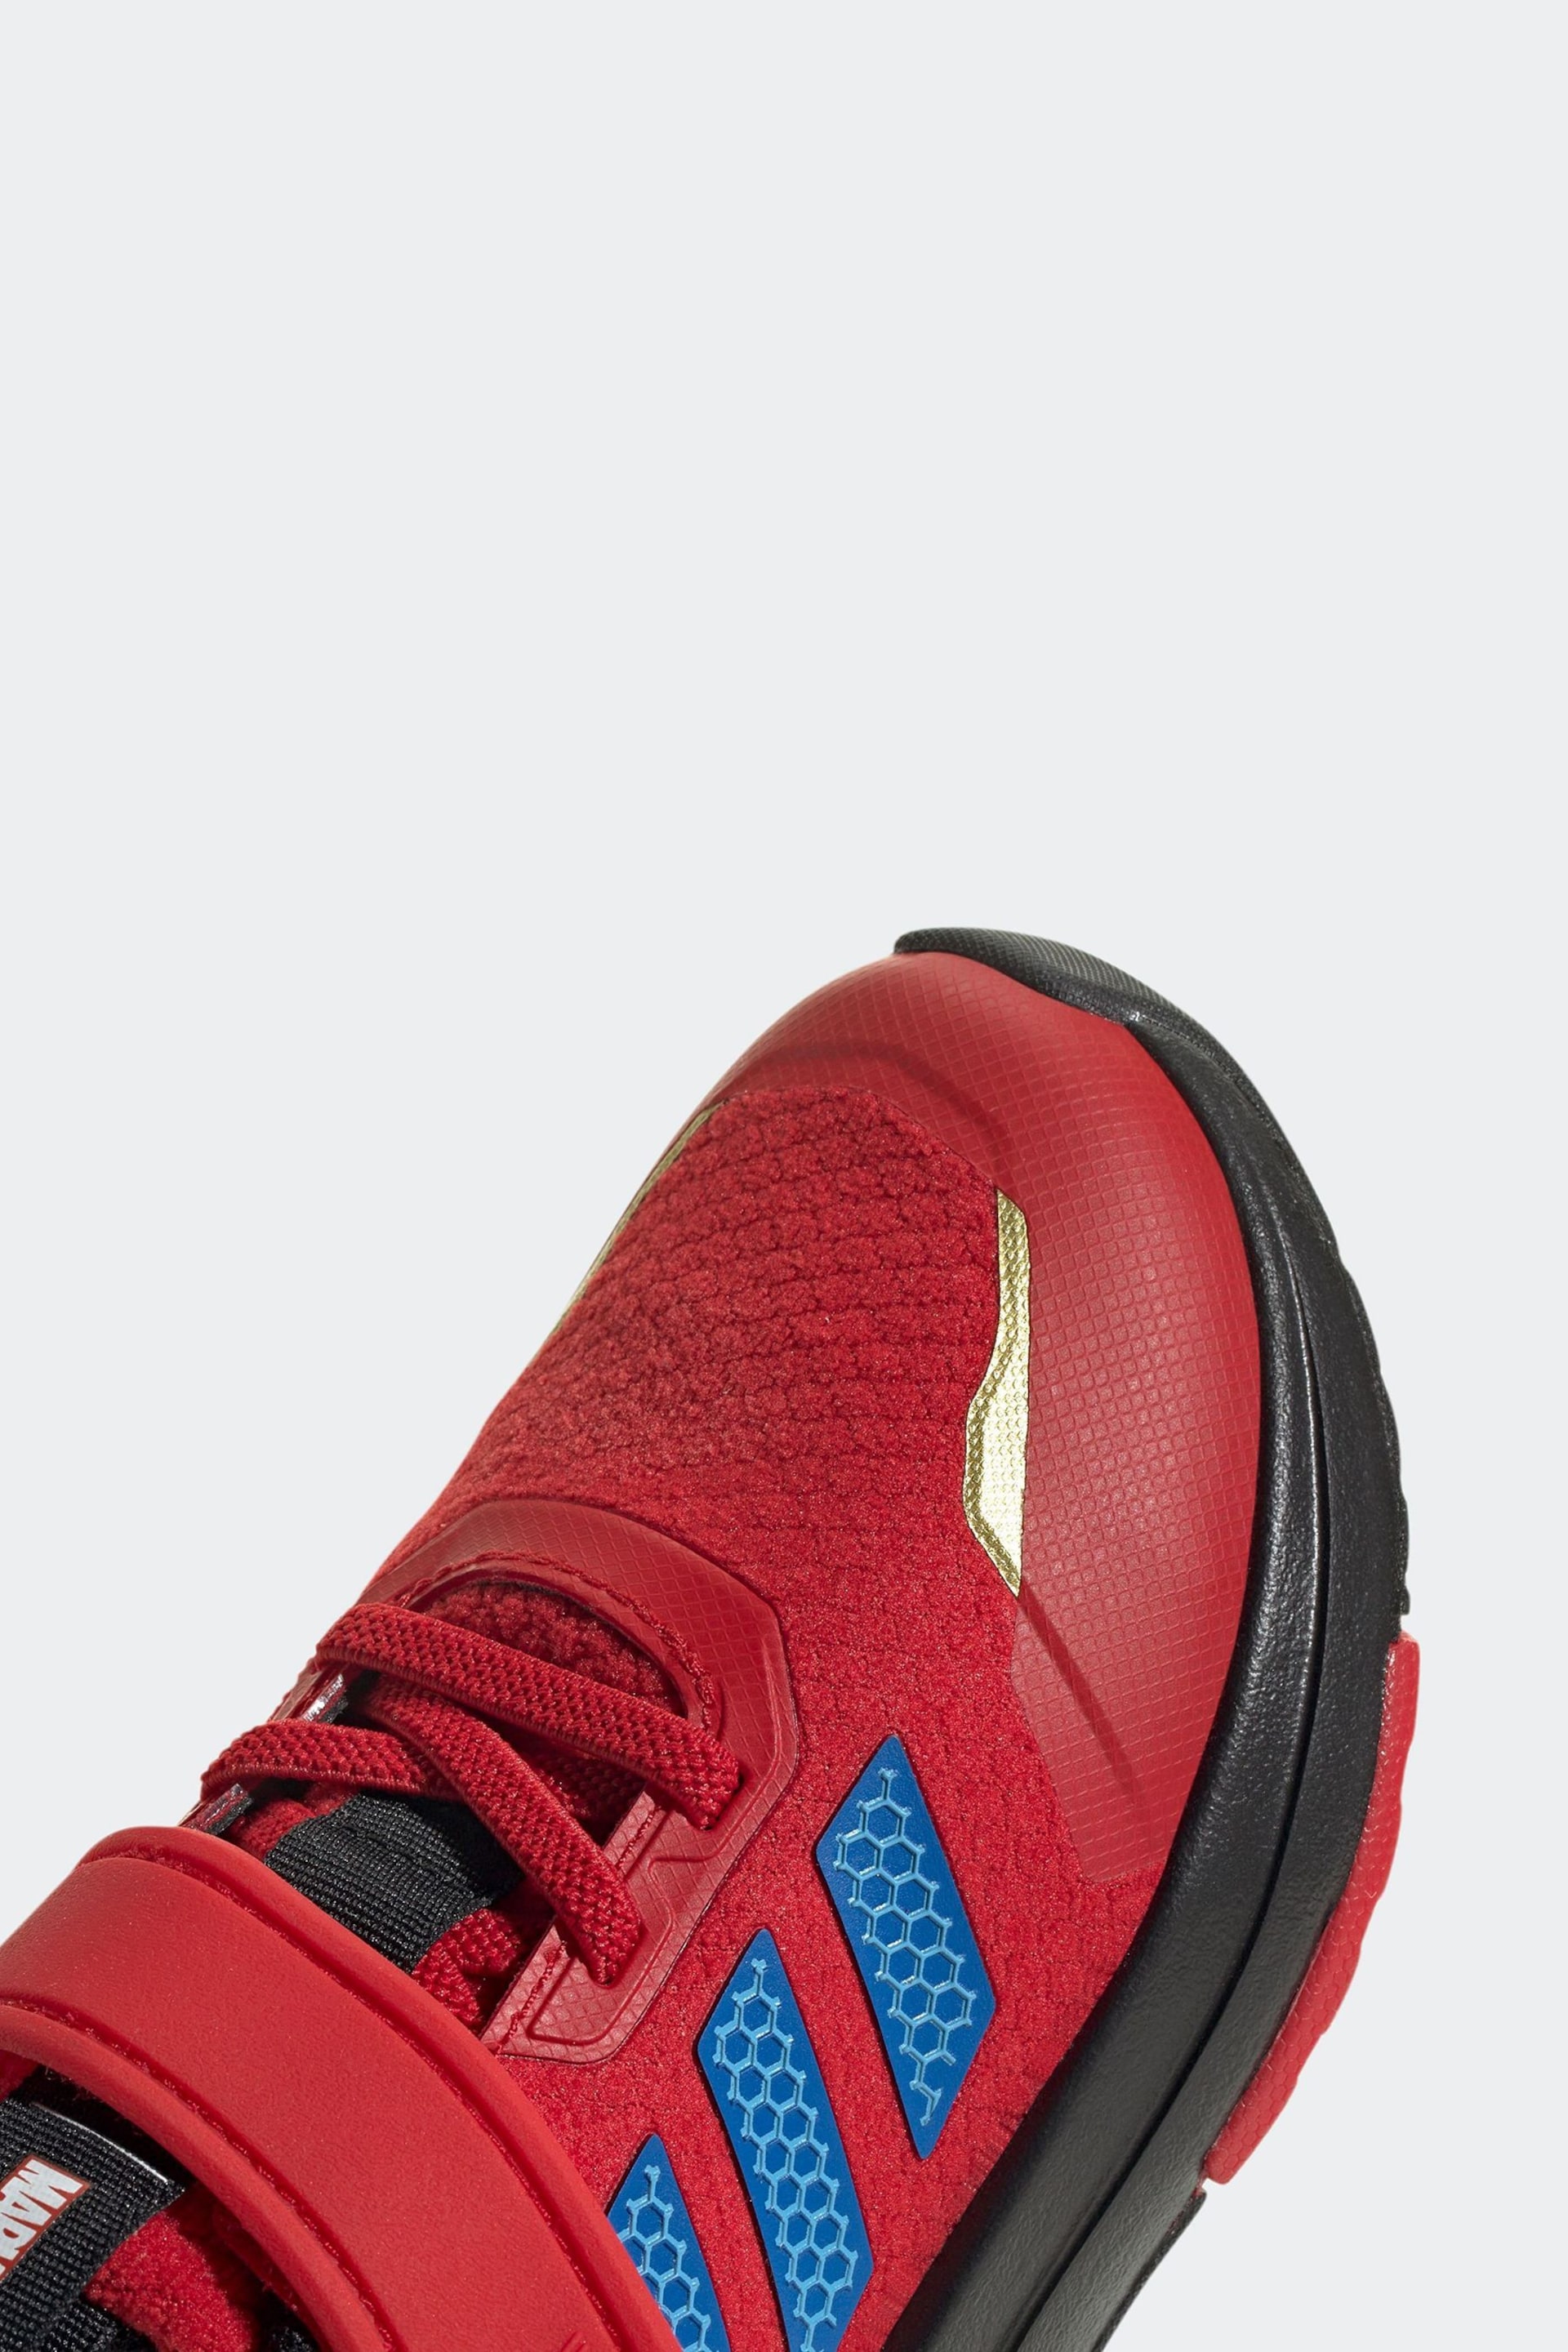 adidas Red Kids Marvel's Iron Man Racer Shoes - Image 8 of 9